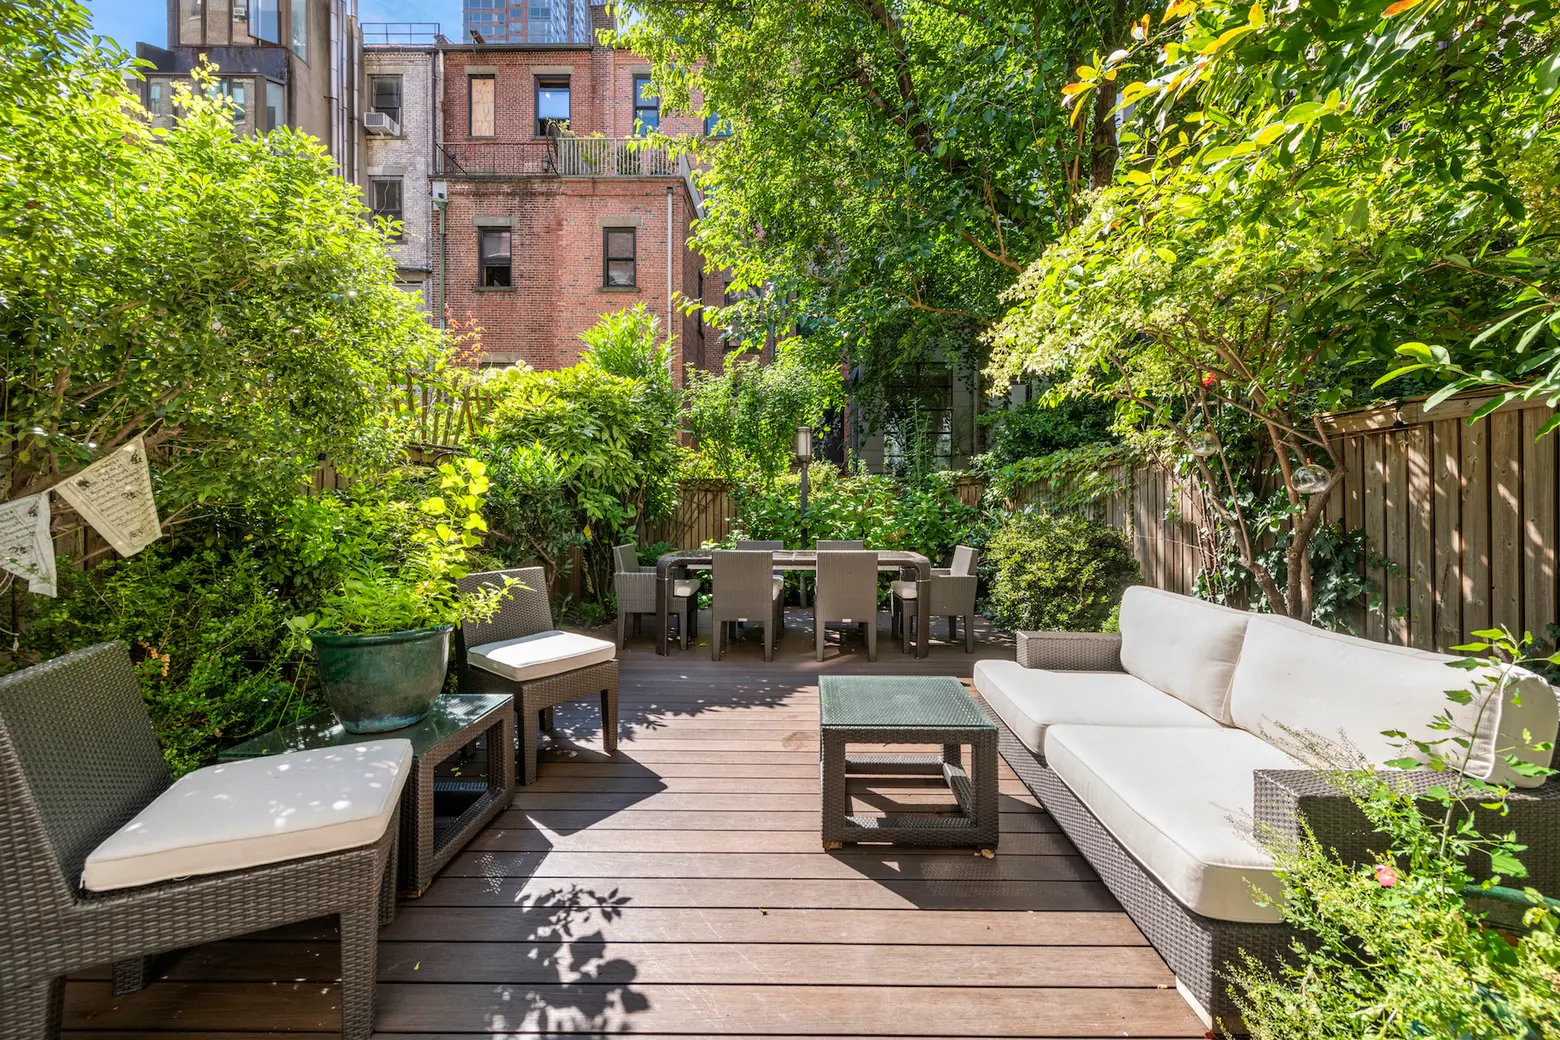 This $1.9M Upper West Side brownstone co-op has a soaking tub and sunny private garden